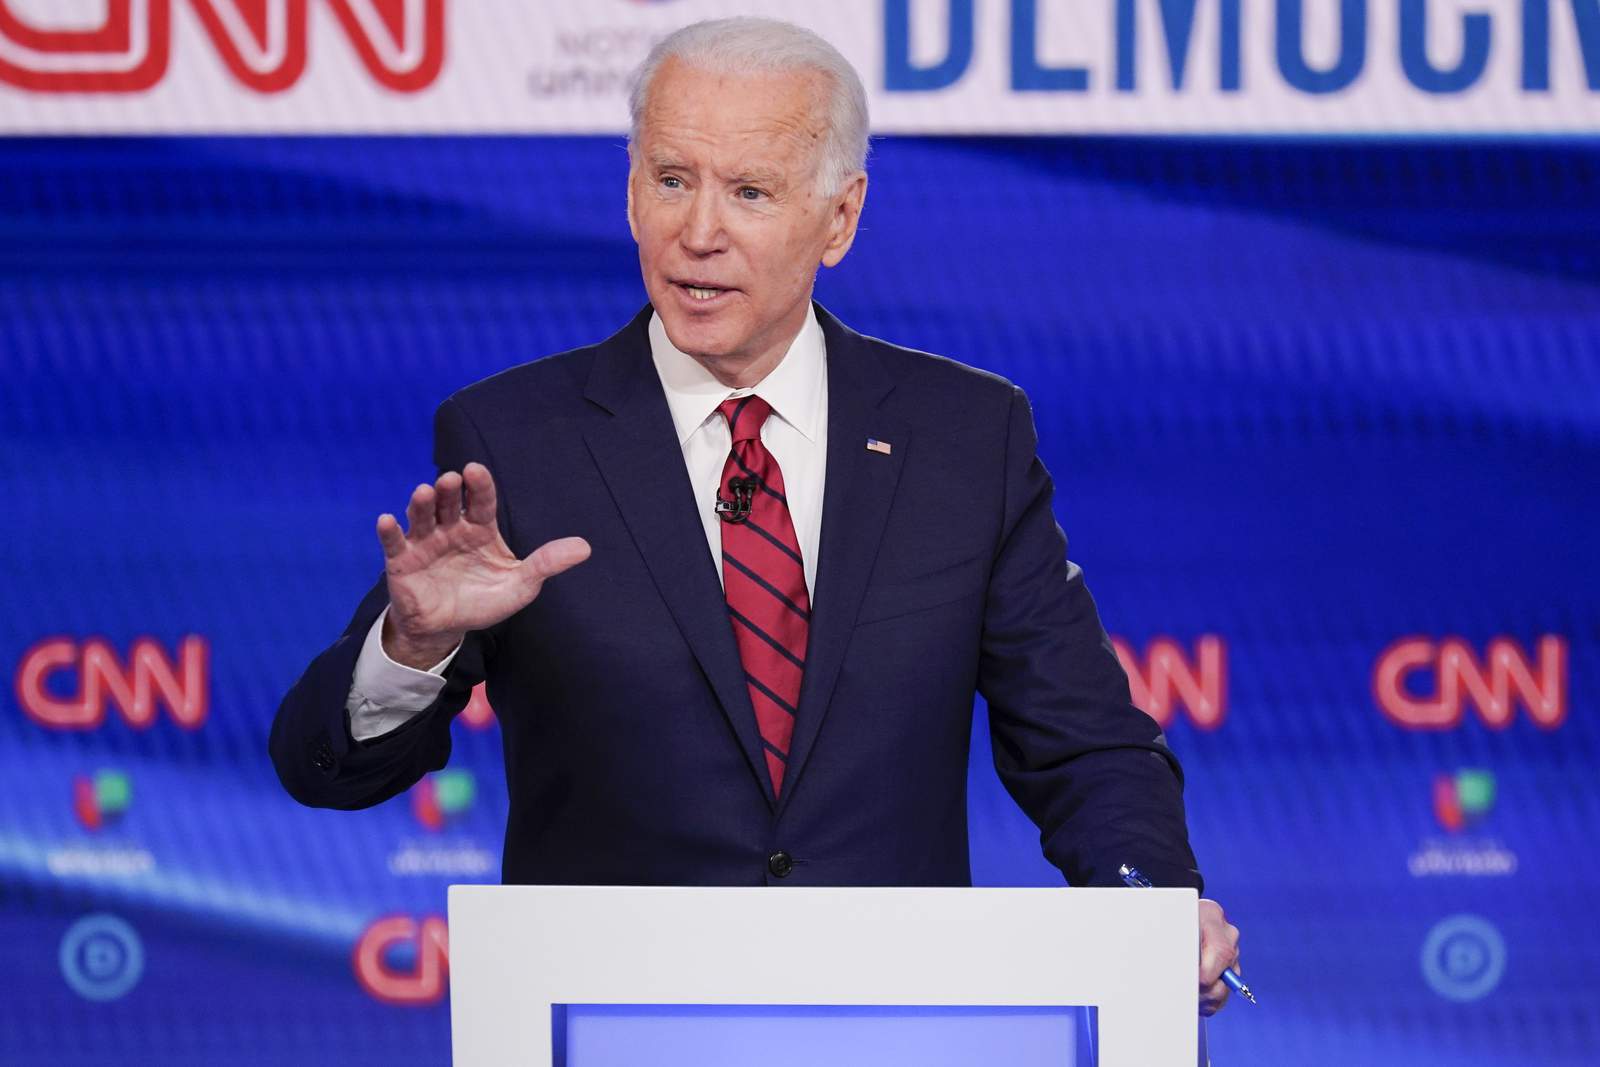 Biden: If you cant choose me over Trump, you aint black